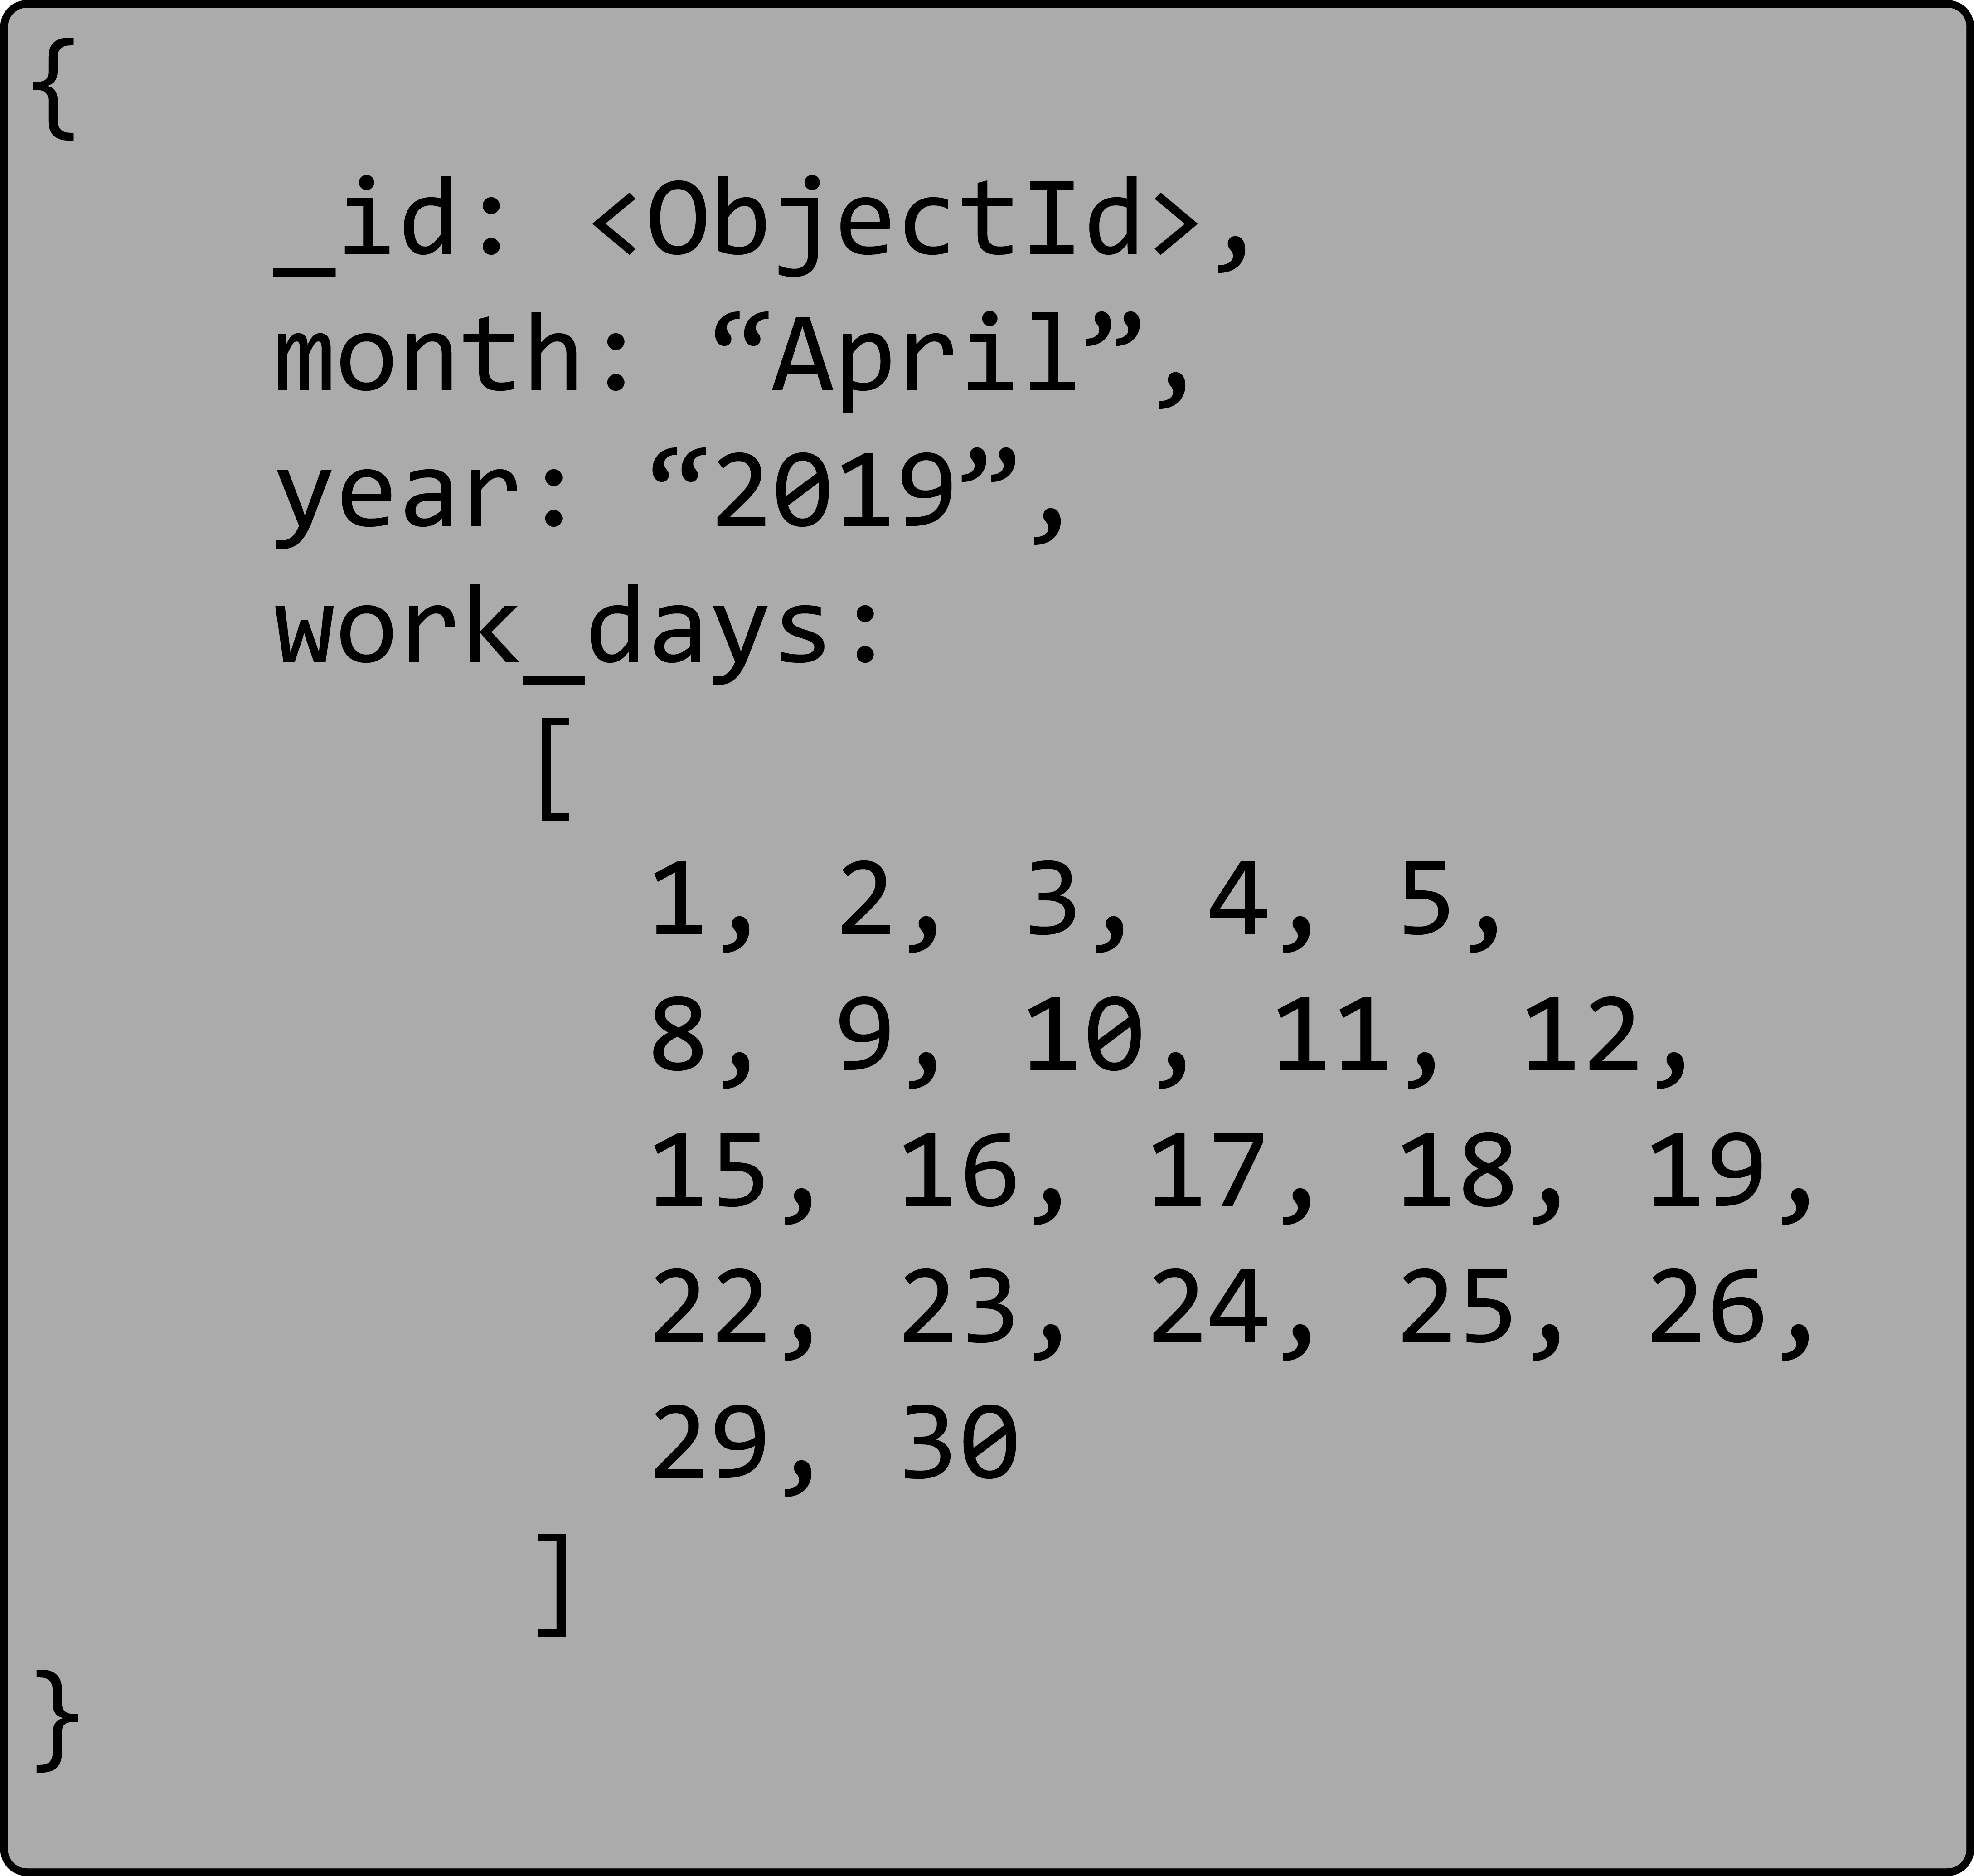 Image of the month of April 2019 with an array